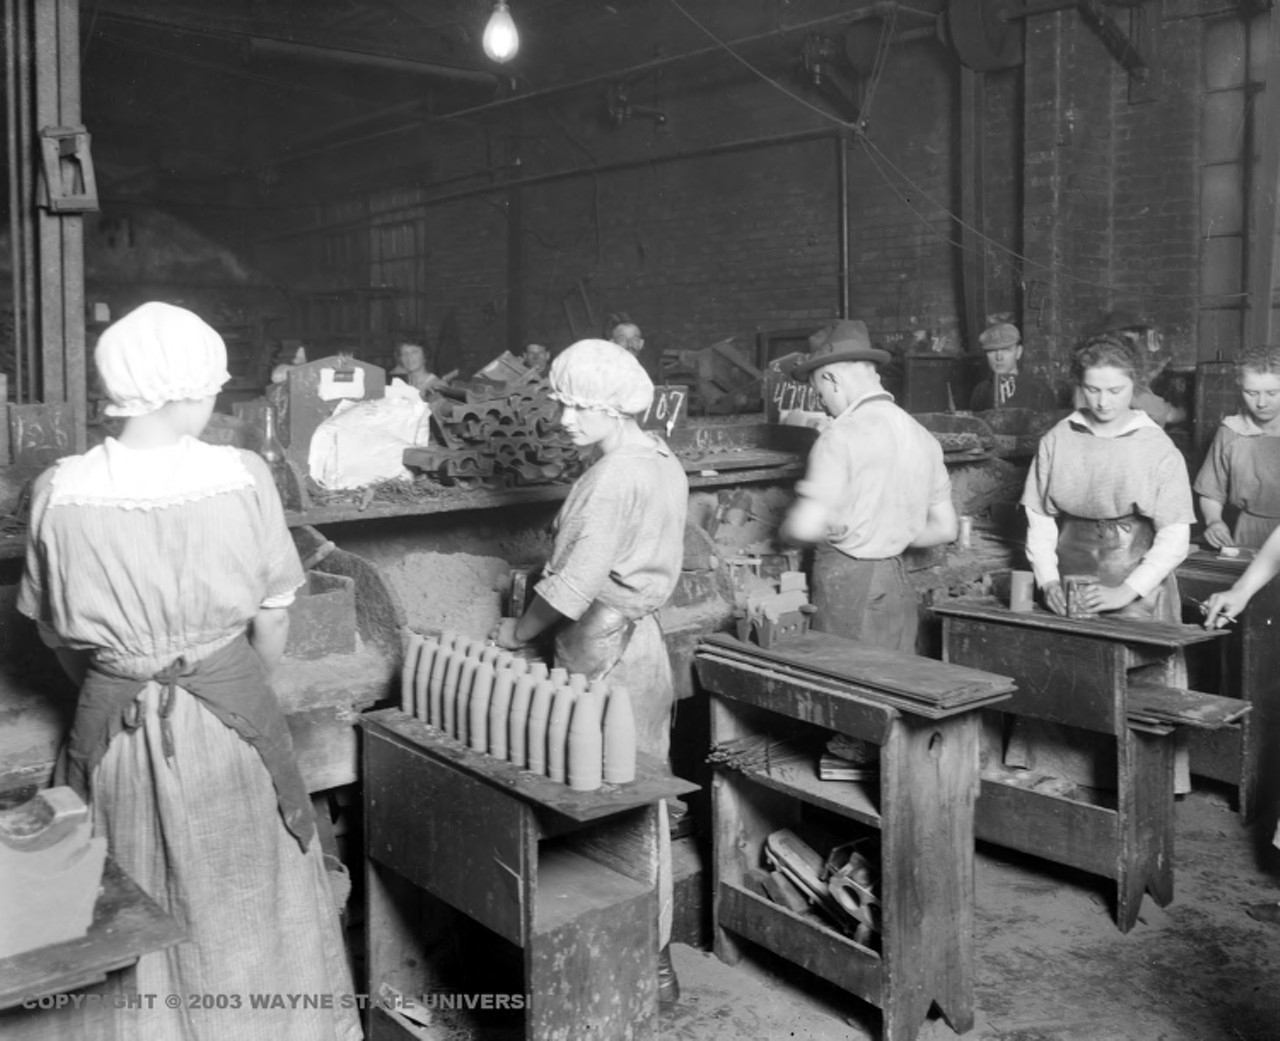 Assembling workers, 1910s